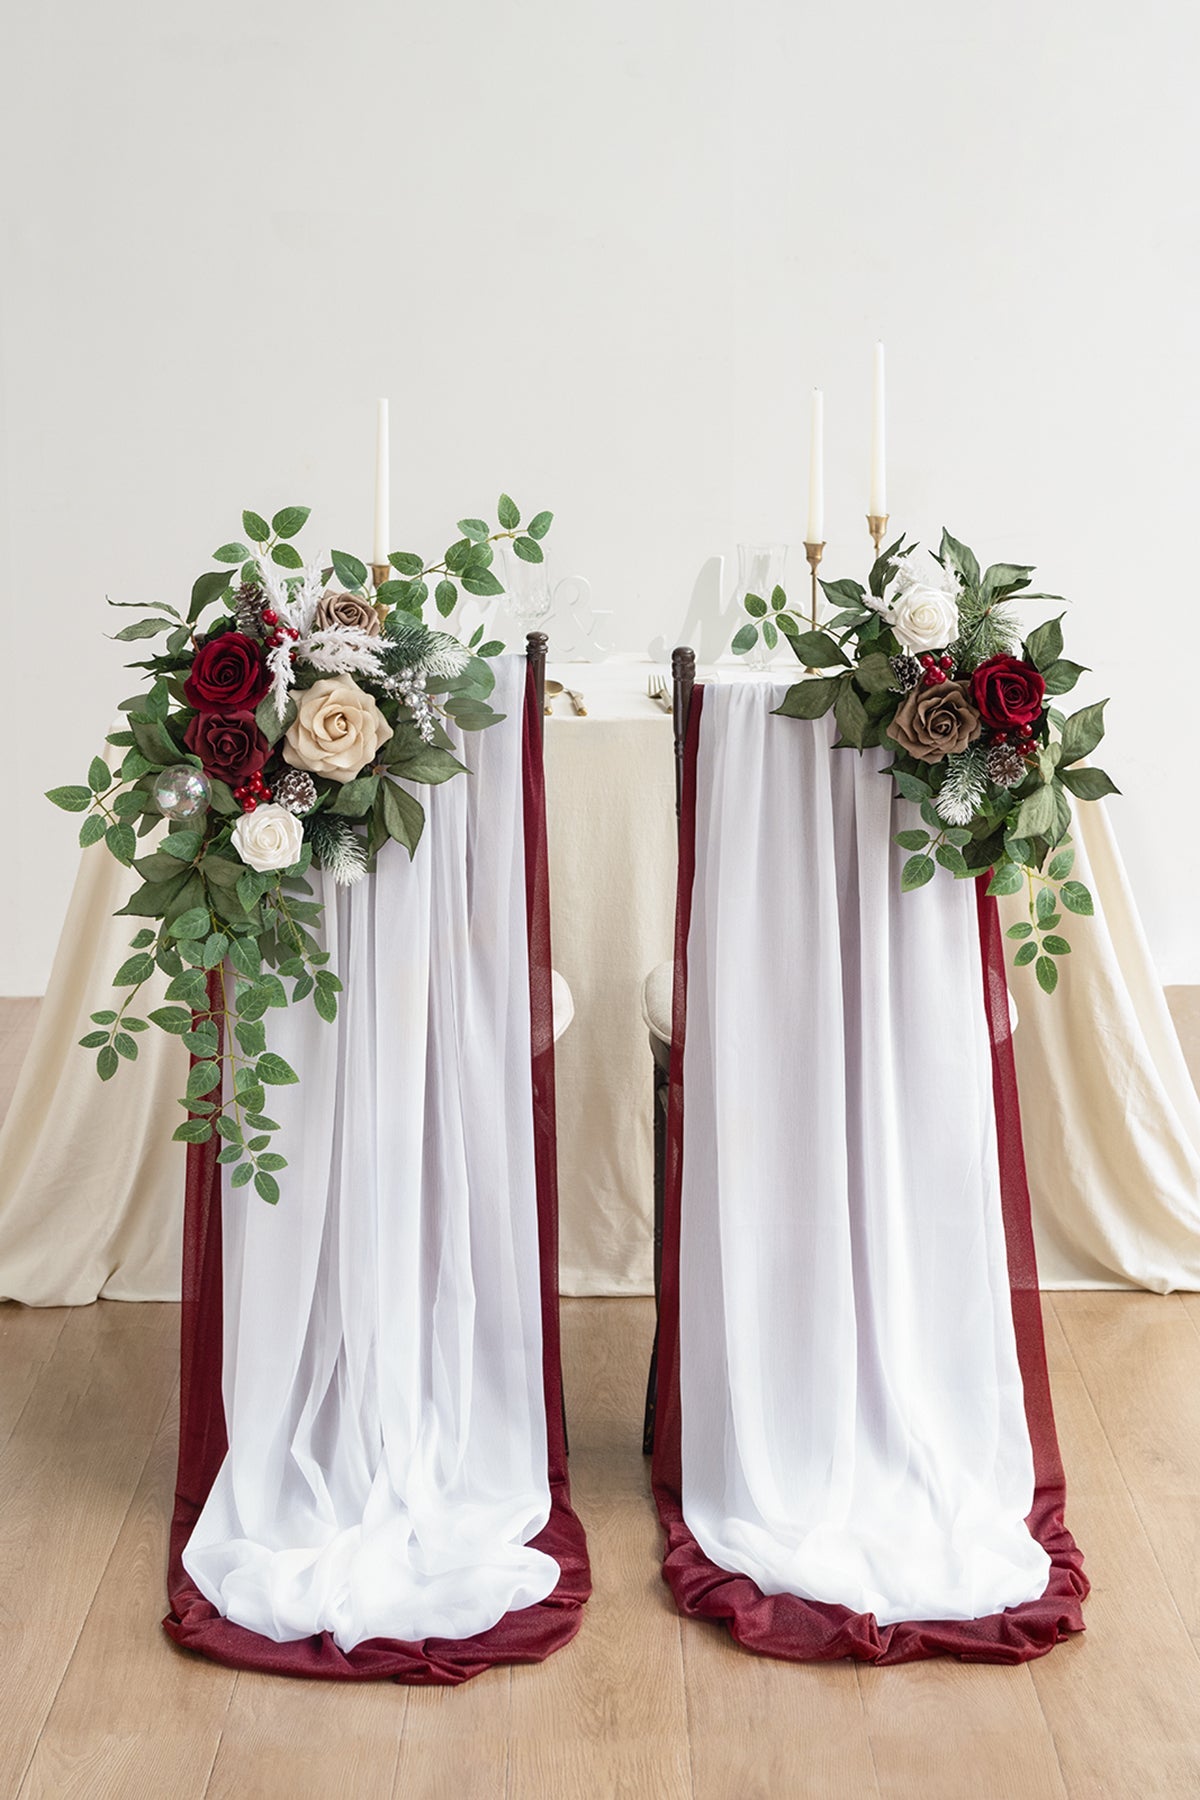 Flash Sale | Couple Chair Floral Decor with Darping in Christmas Red & Sparkle